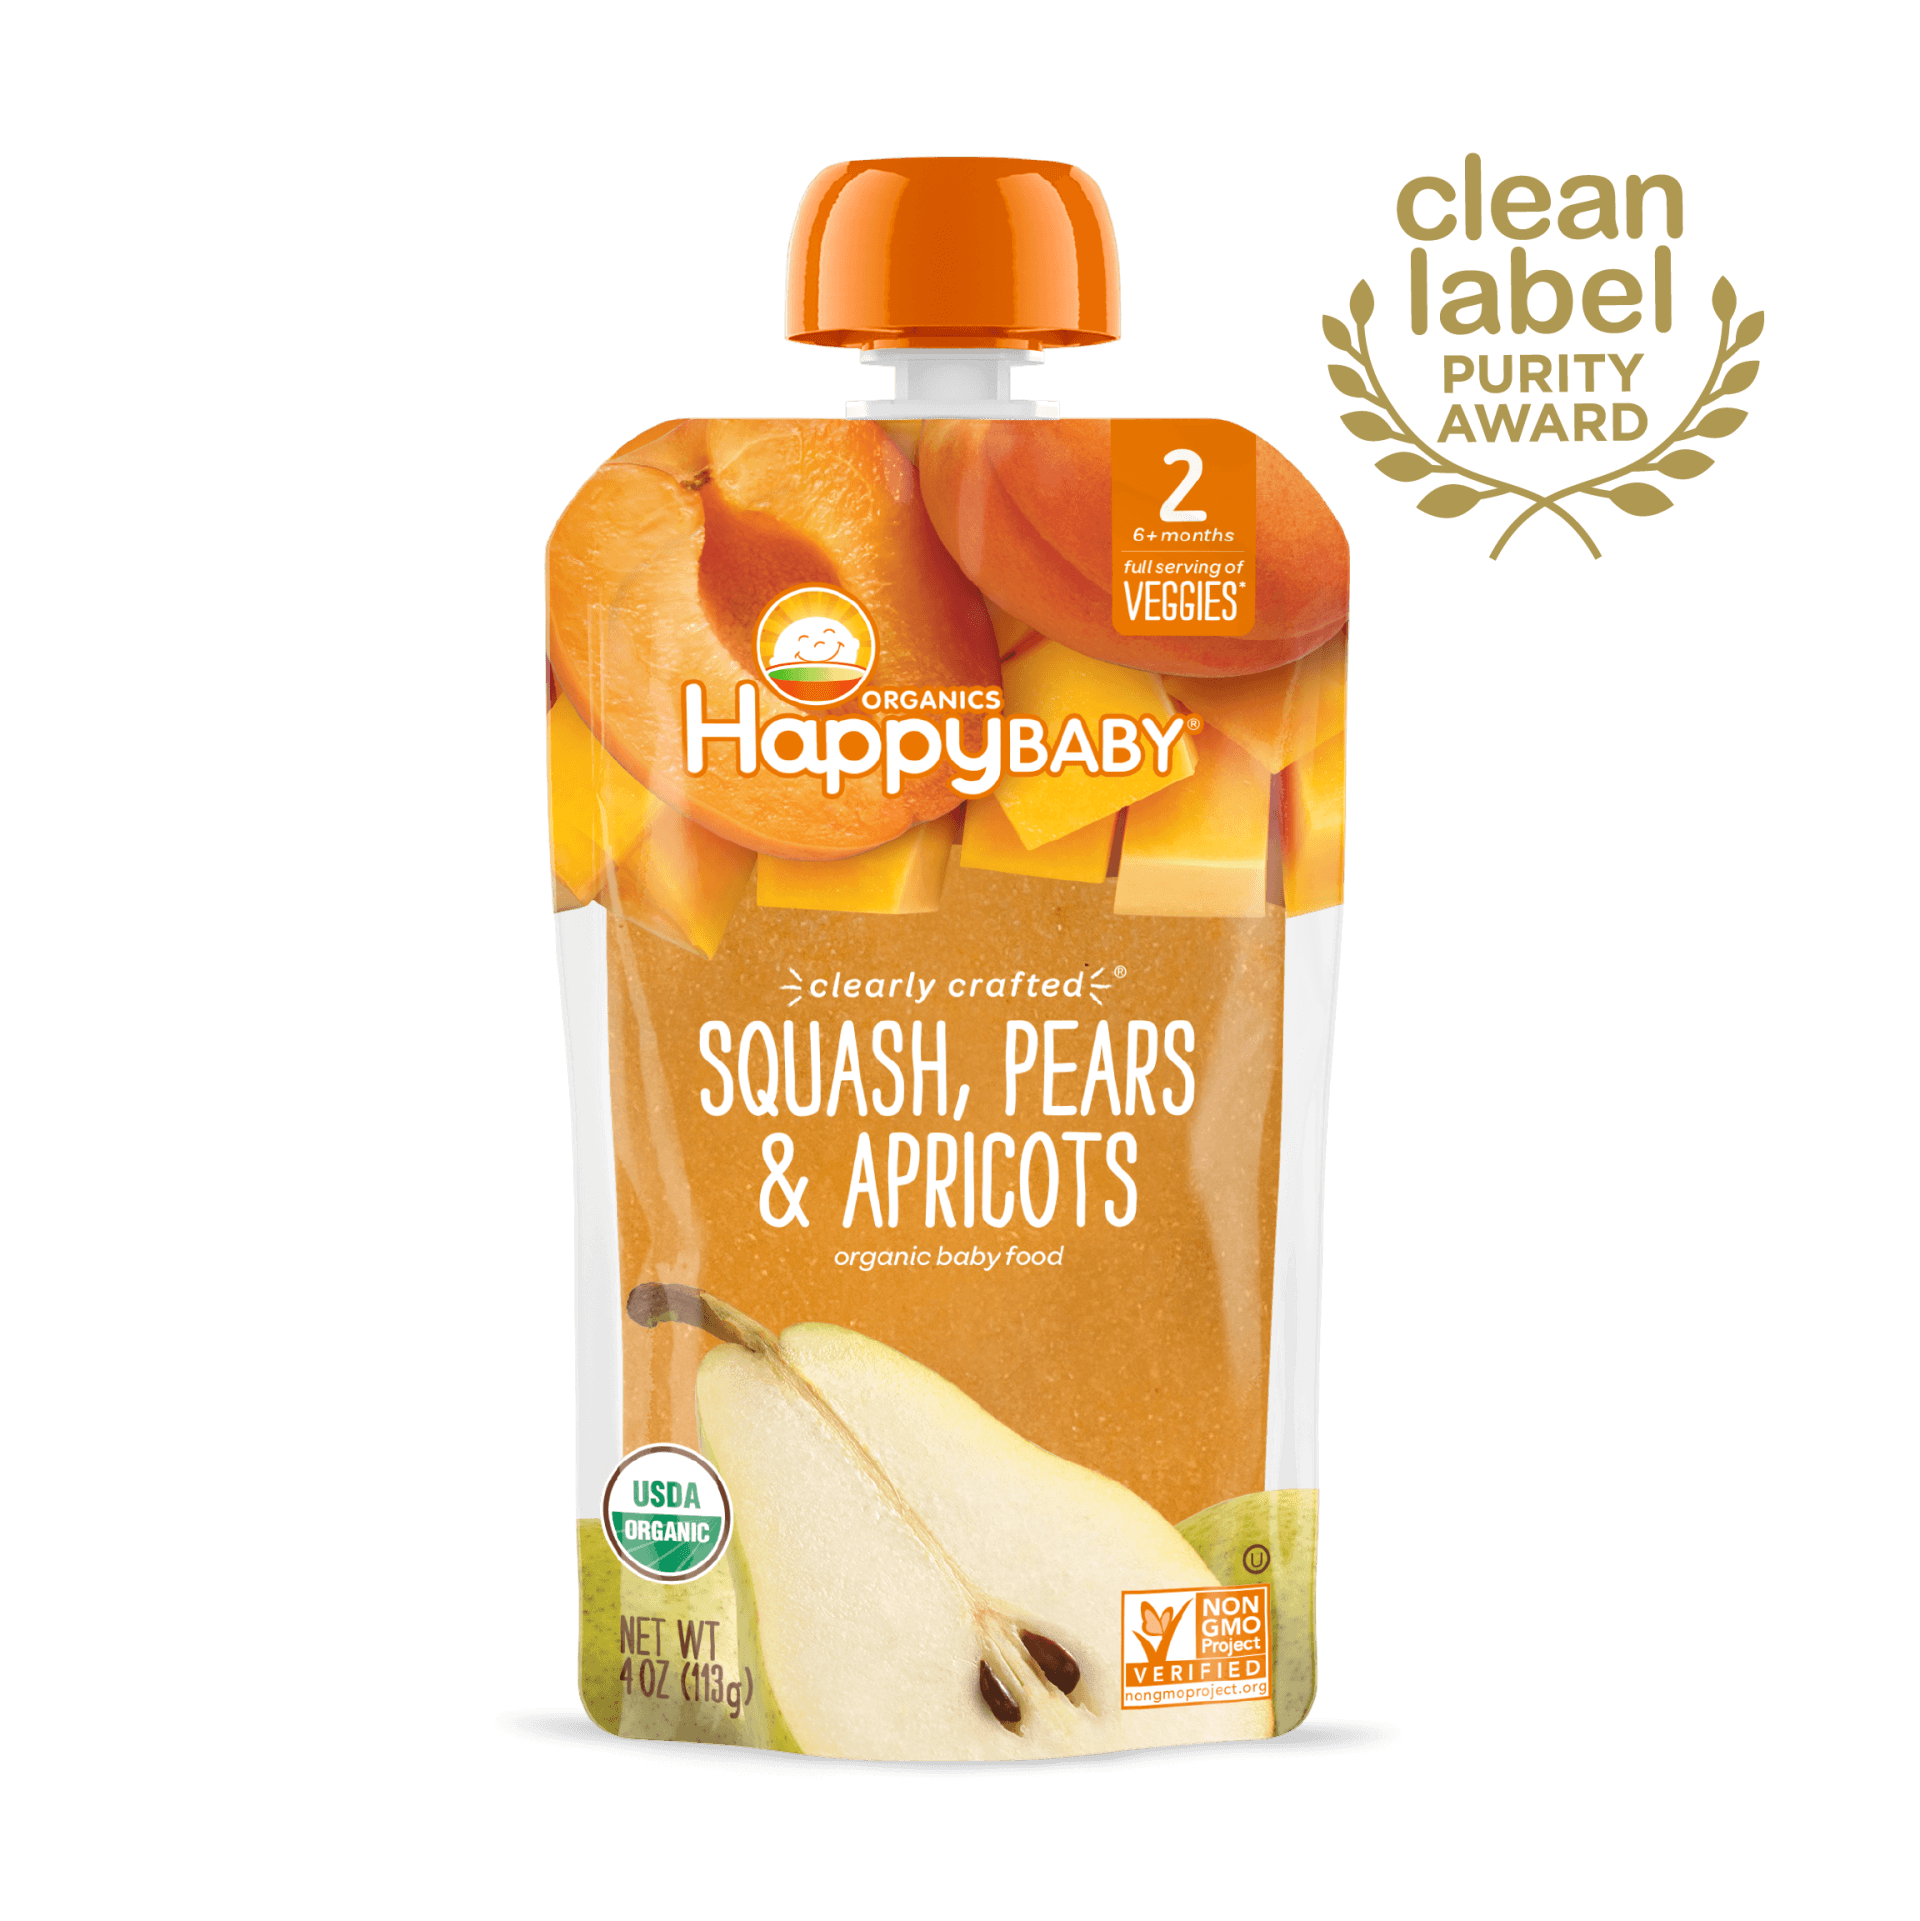 Happy Baby S2 - Clearly Crafted Squash Pears & Apricots 4Oz pouch 16 units per case 4.0 oz